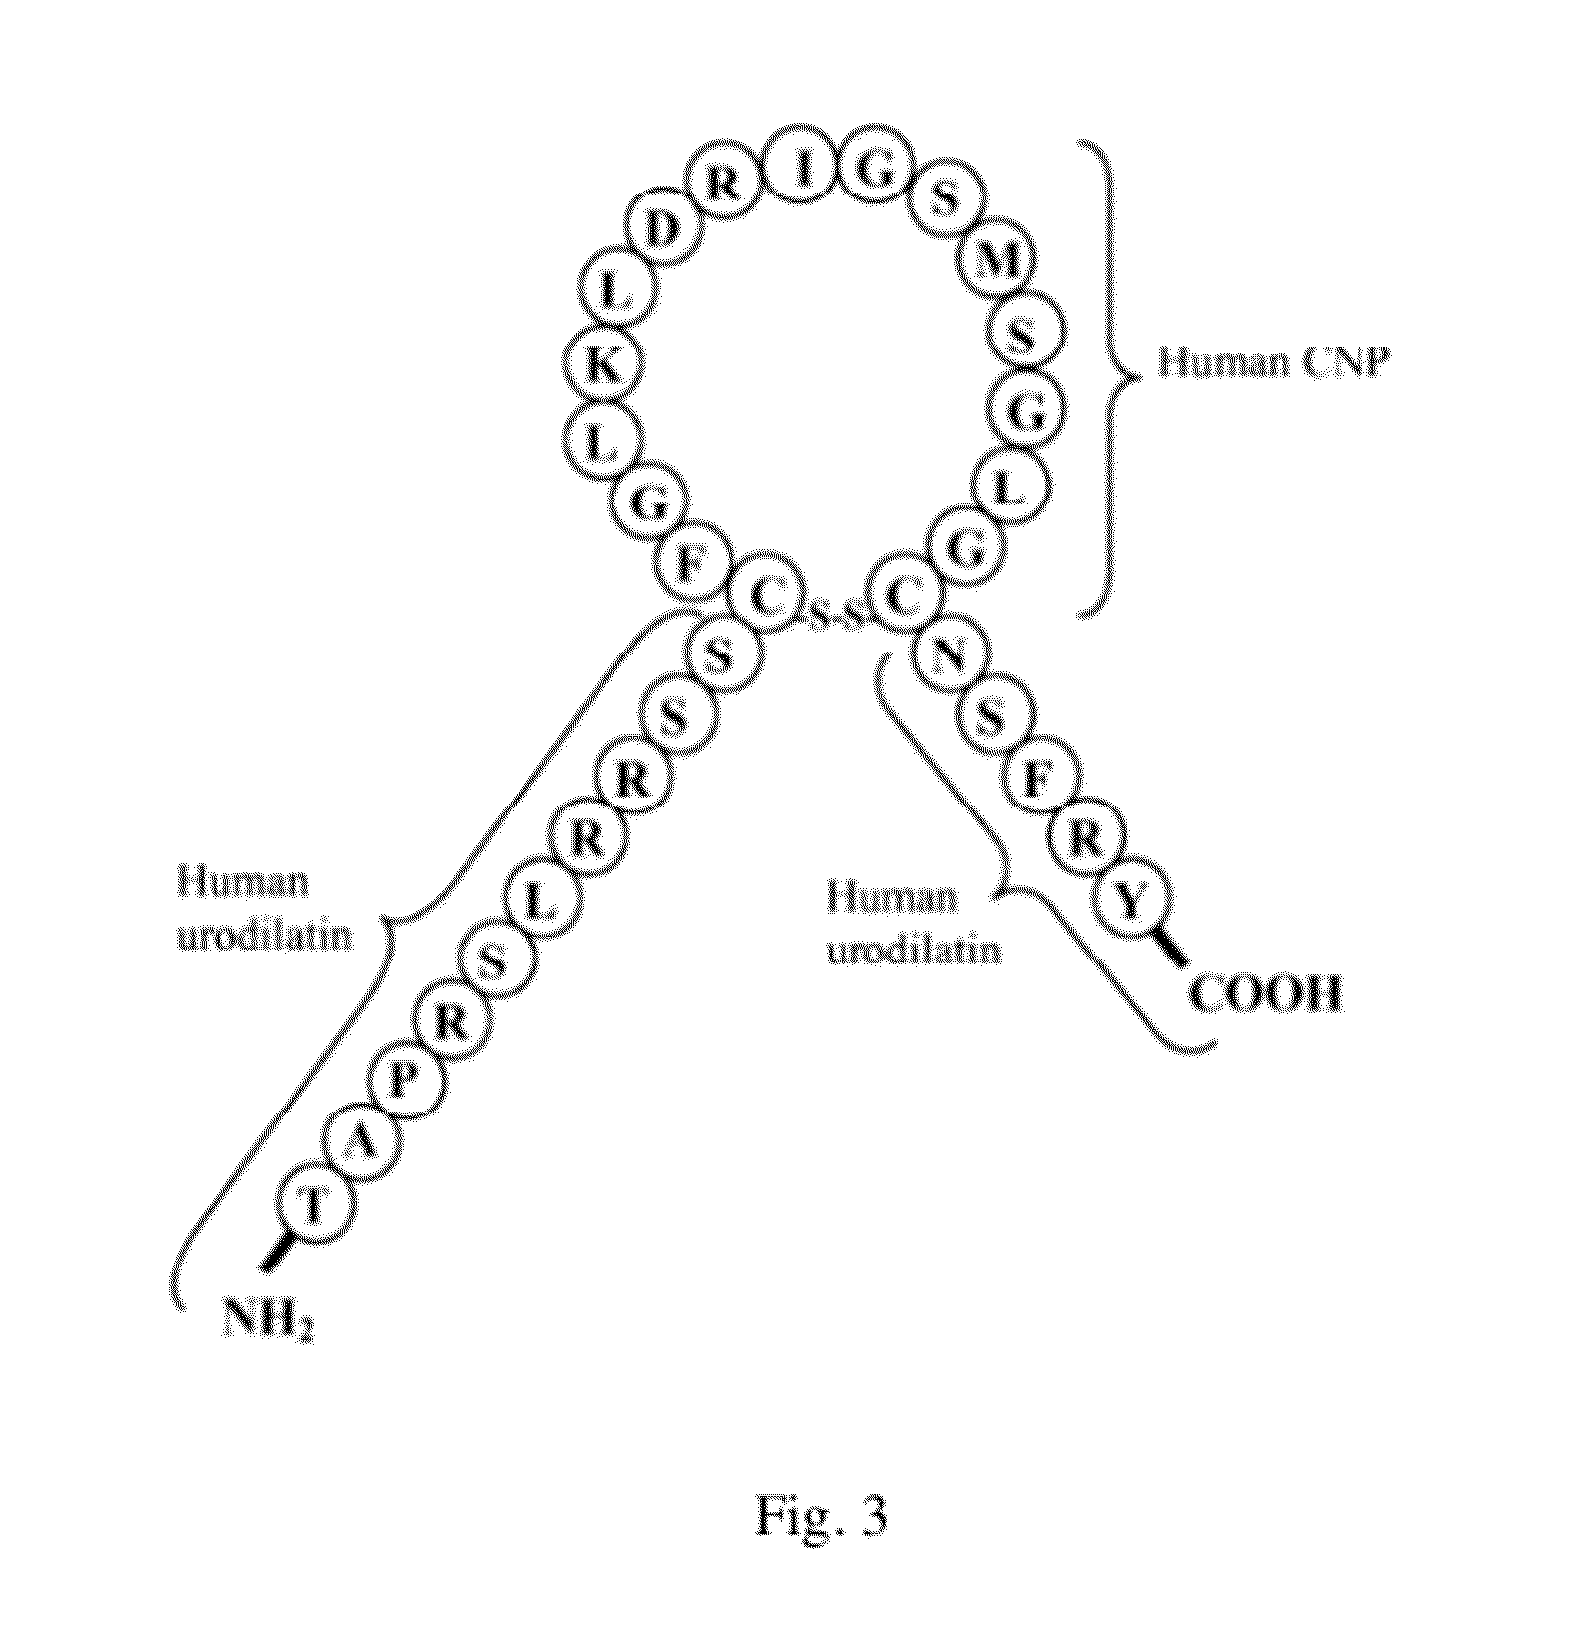 Systems and methods for therapy of kidney disease and/or heart failure using chimeric natriuretic peptides